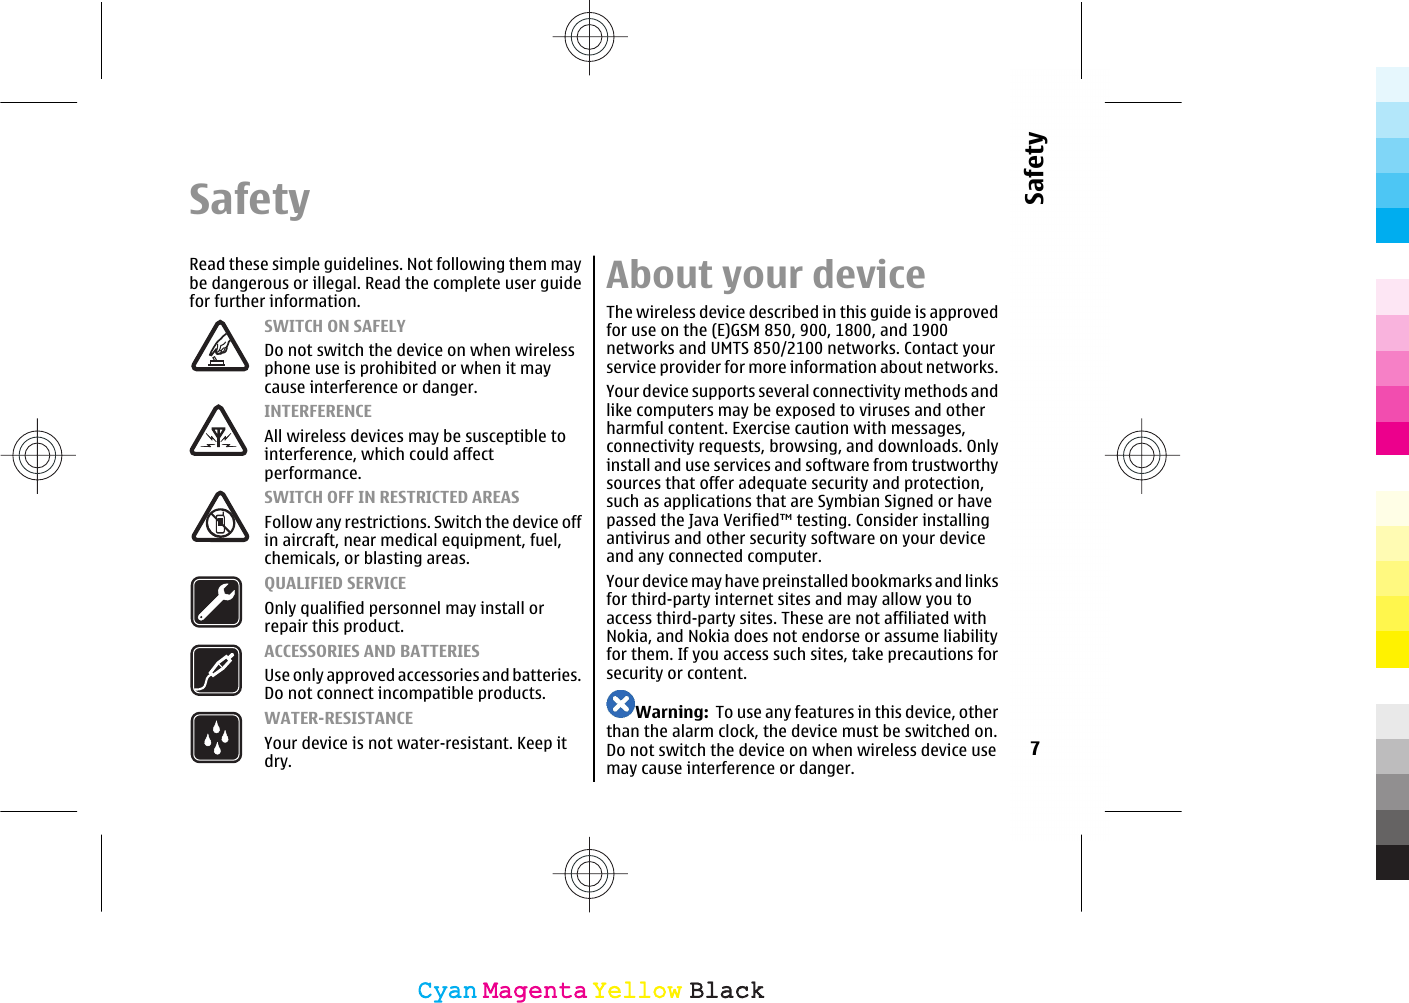 SafetyRead these simple guidelines. Not following them maybe dangerous or illegal. Read the complete user guidefor further information.SWITCH ON SAFELYDo not switch the device on when wirelessphone use is prohibited or when it maycause interference or danger.INTERFERENCEAll wireless devices may be susceptible tointerference, which could affectperformance.SWITCH OFF IN RESTRICTED AREASFollow any restrictions. Switch the device offin aircraft, near medical equipment, fuel,chemicals, or blasting areas.QUALIFIED SERVICEOnly qualified personnel may install orrepair this product.ACCESSORIES AND BATTERIESUse only approved accessories and batteries.Do not connect incompatible products.WATER-RESISTANCEYour device is not water-resistant. Keep itdry.About your deviceThe wireless device described in this guide is approvedfor use on the (E)GSM 850, 900, 1800, and 1900networks and UMTS 850/2100 networks. Contact yourservice provider for more information about networks.Your device supports several connectivity methods andlike computers may be exposed to viruses and otherharmful content. Exercise caution with messages,connectivity requests, browsing, and downloads. Onlyinstall and use services and software from trustworthysources that offer adequate security and protection,such as applications that are Symbian Signed or havepassed the Java Verified™ testing. Consider installingantivirus and other security software on your deviceand any connected computer.Your device may have preinstalled bookmarks and linksfor third-party internet sites and may allow you toaccess third-party sites. These are not affiliated withNokia, and Nokia does not endorse or assume liabilityfor them. If you access such sites, take precautions forsecurity or content.Warning:  To use any features in this device, otherthan the alarm clock, the device must be switched on.Do not switch the device on when wireless device usemay cause interference or danger.7SafetyCyanCyanMagentaMagentaYellowYellowBlackBlack